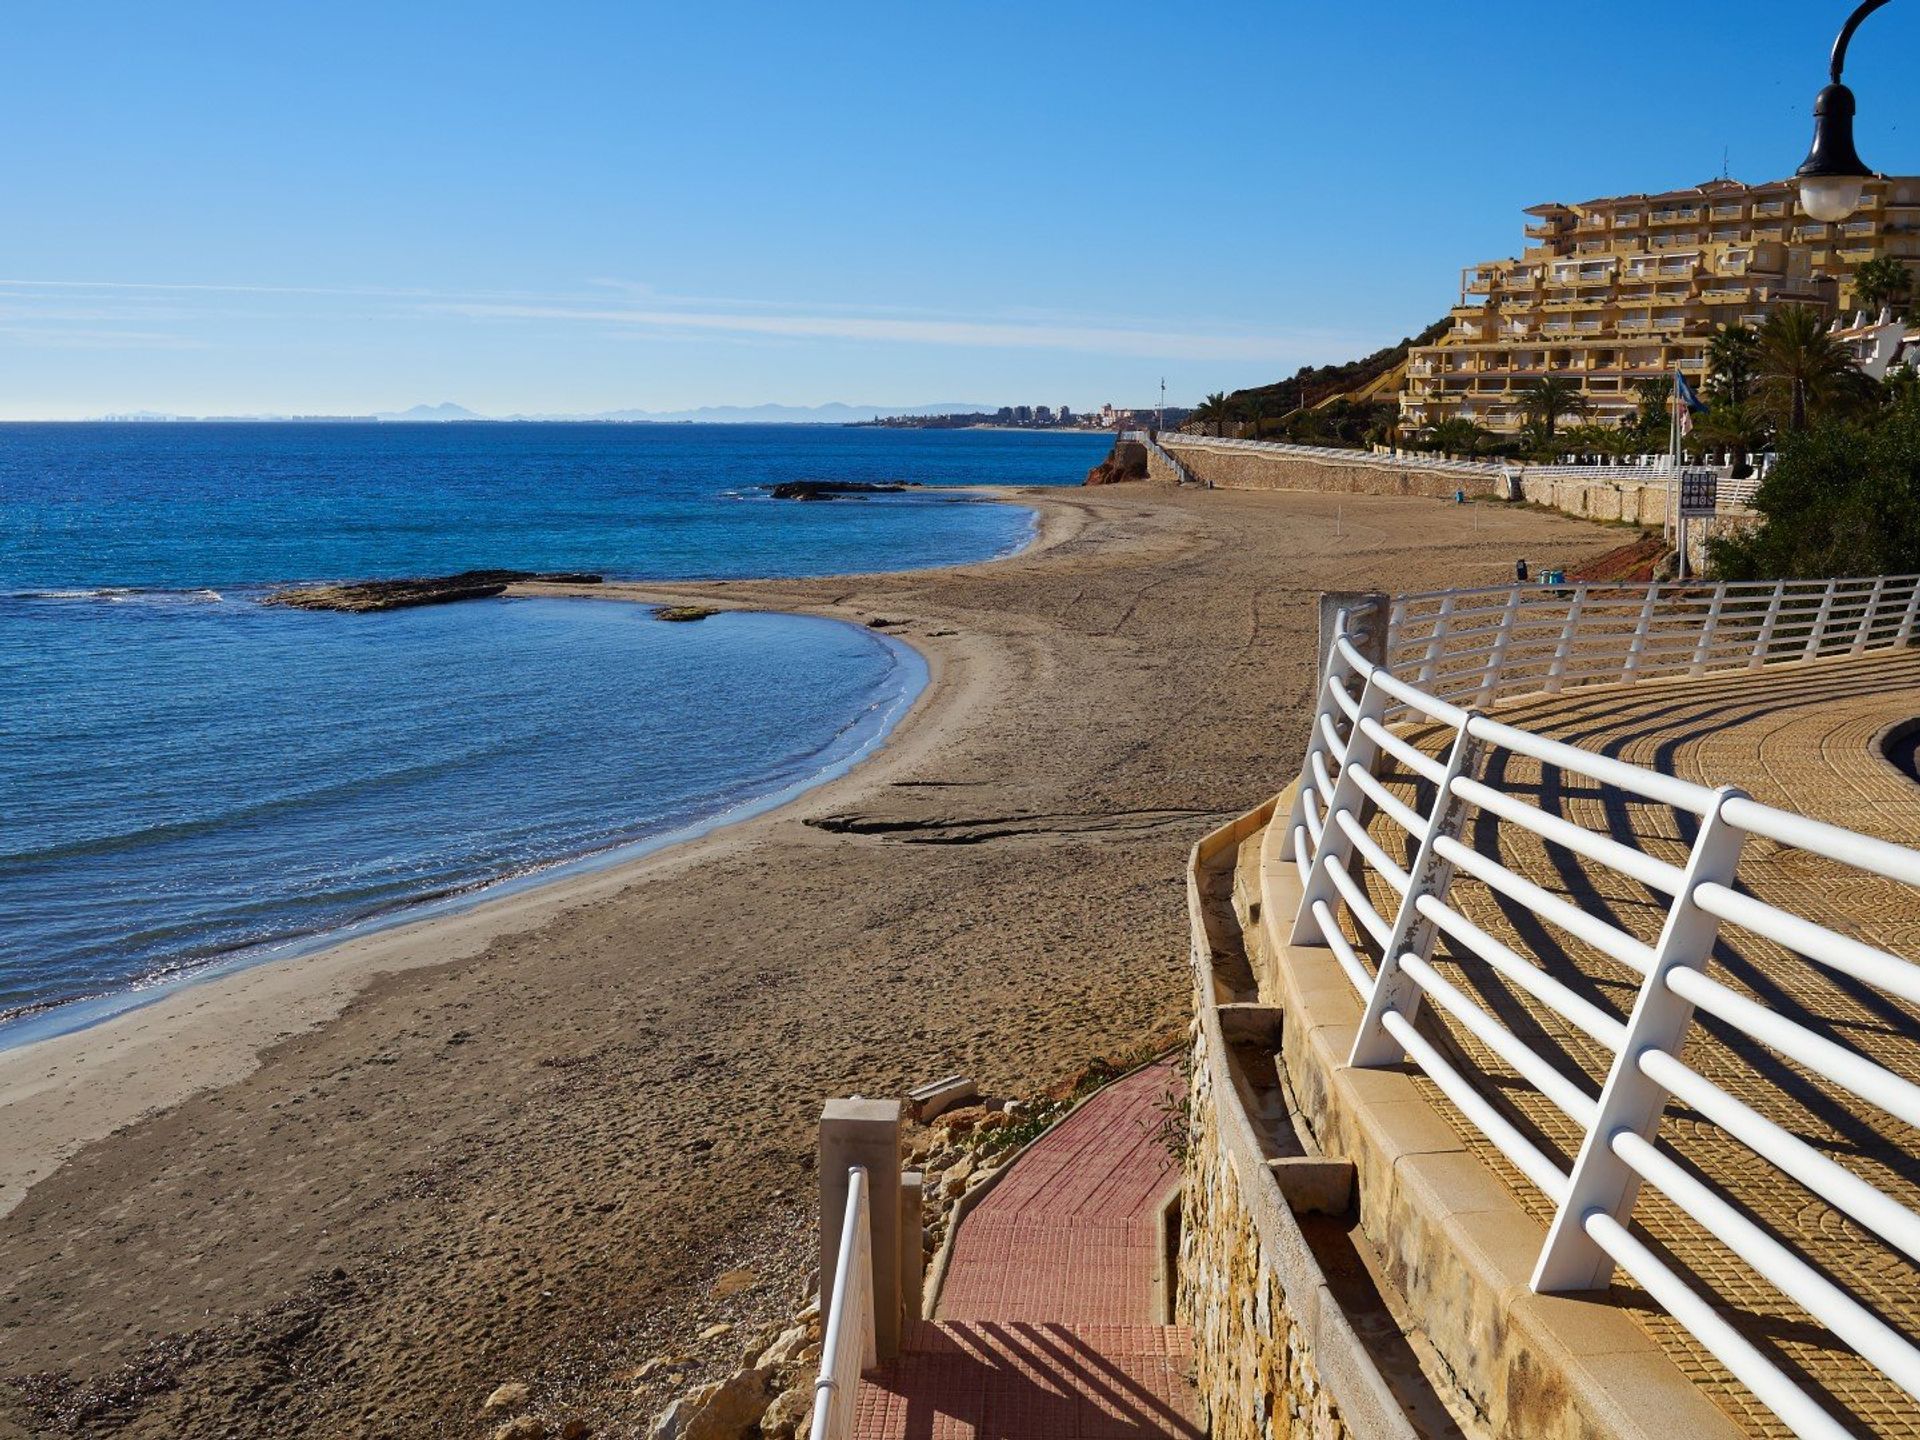 Local Playa Flamenca beach is a perfect for a low-key day unwinding by the coast